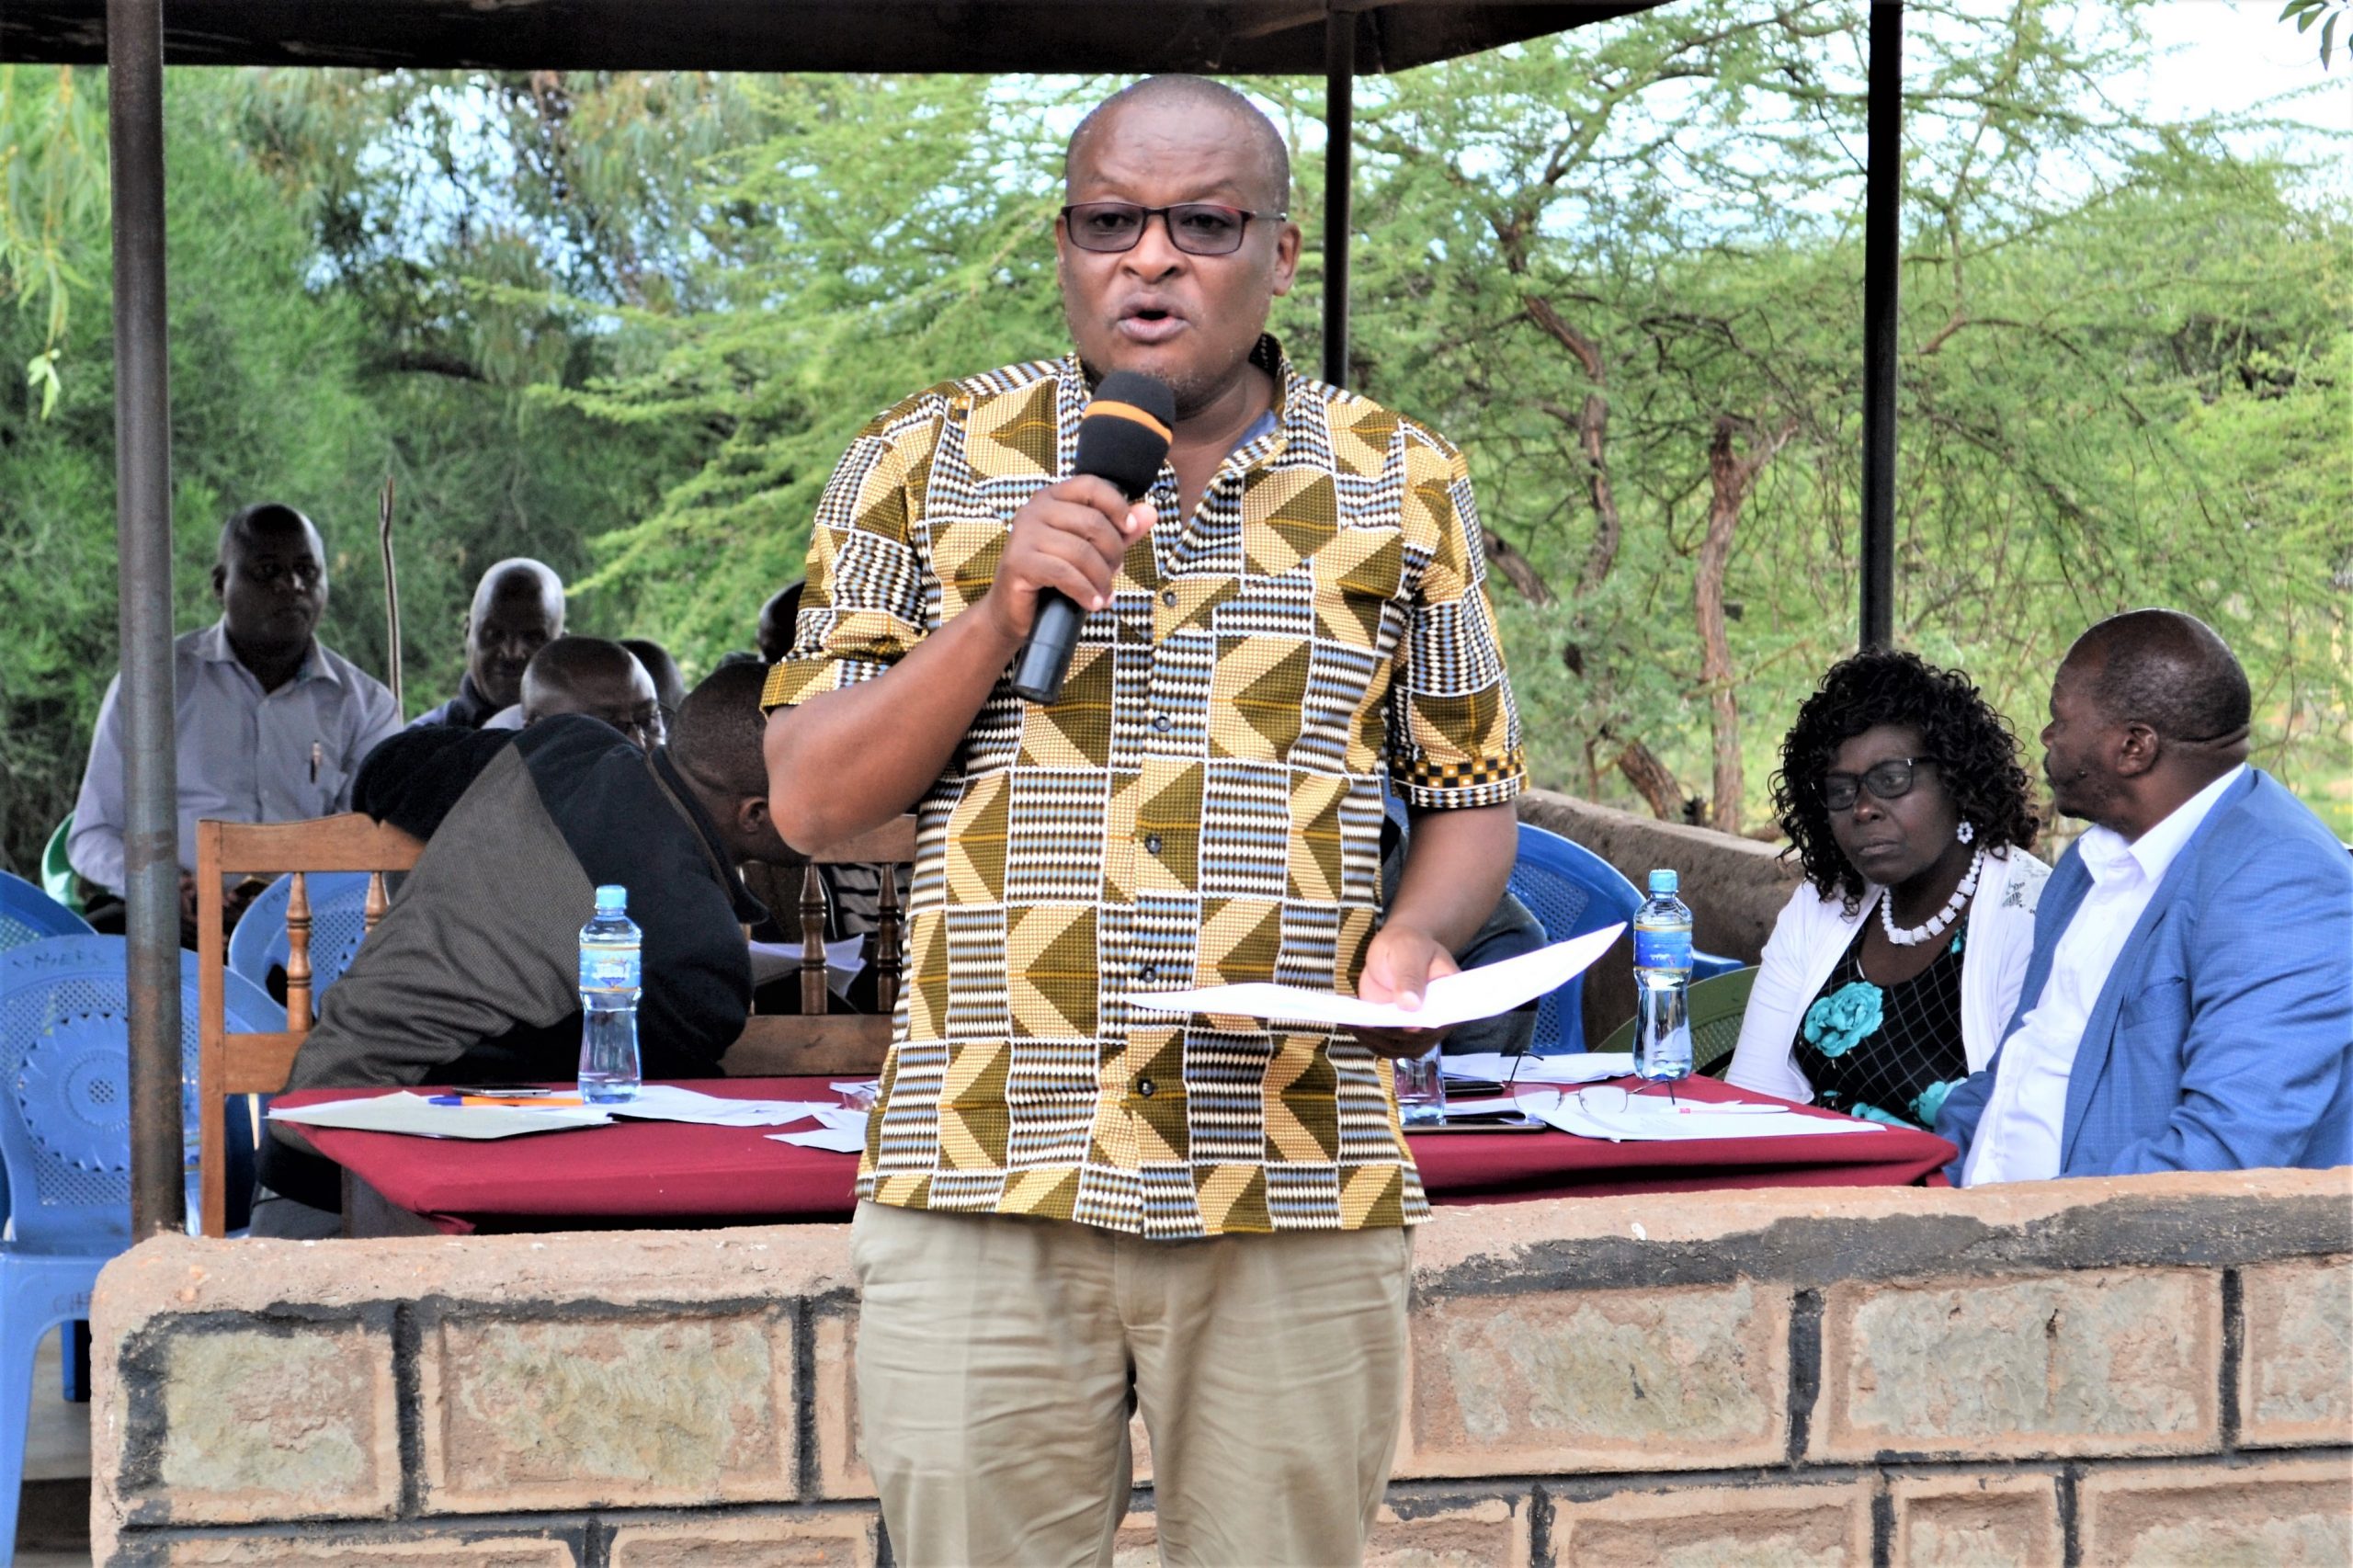 /Budget-and-Appropriations-Committee-Chairman-Harrison-Mwaluko-Mwea-MCA-explaining-the-2019-2020-Budget-to-Makima-Residents-during-a-Public-Participation-forum.